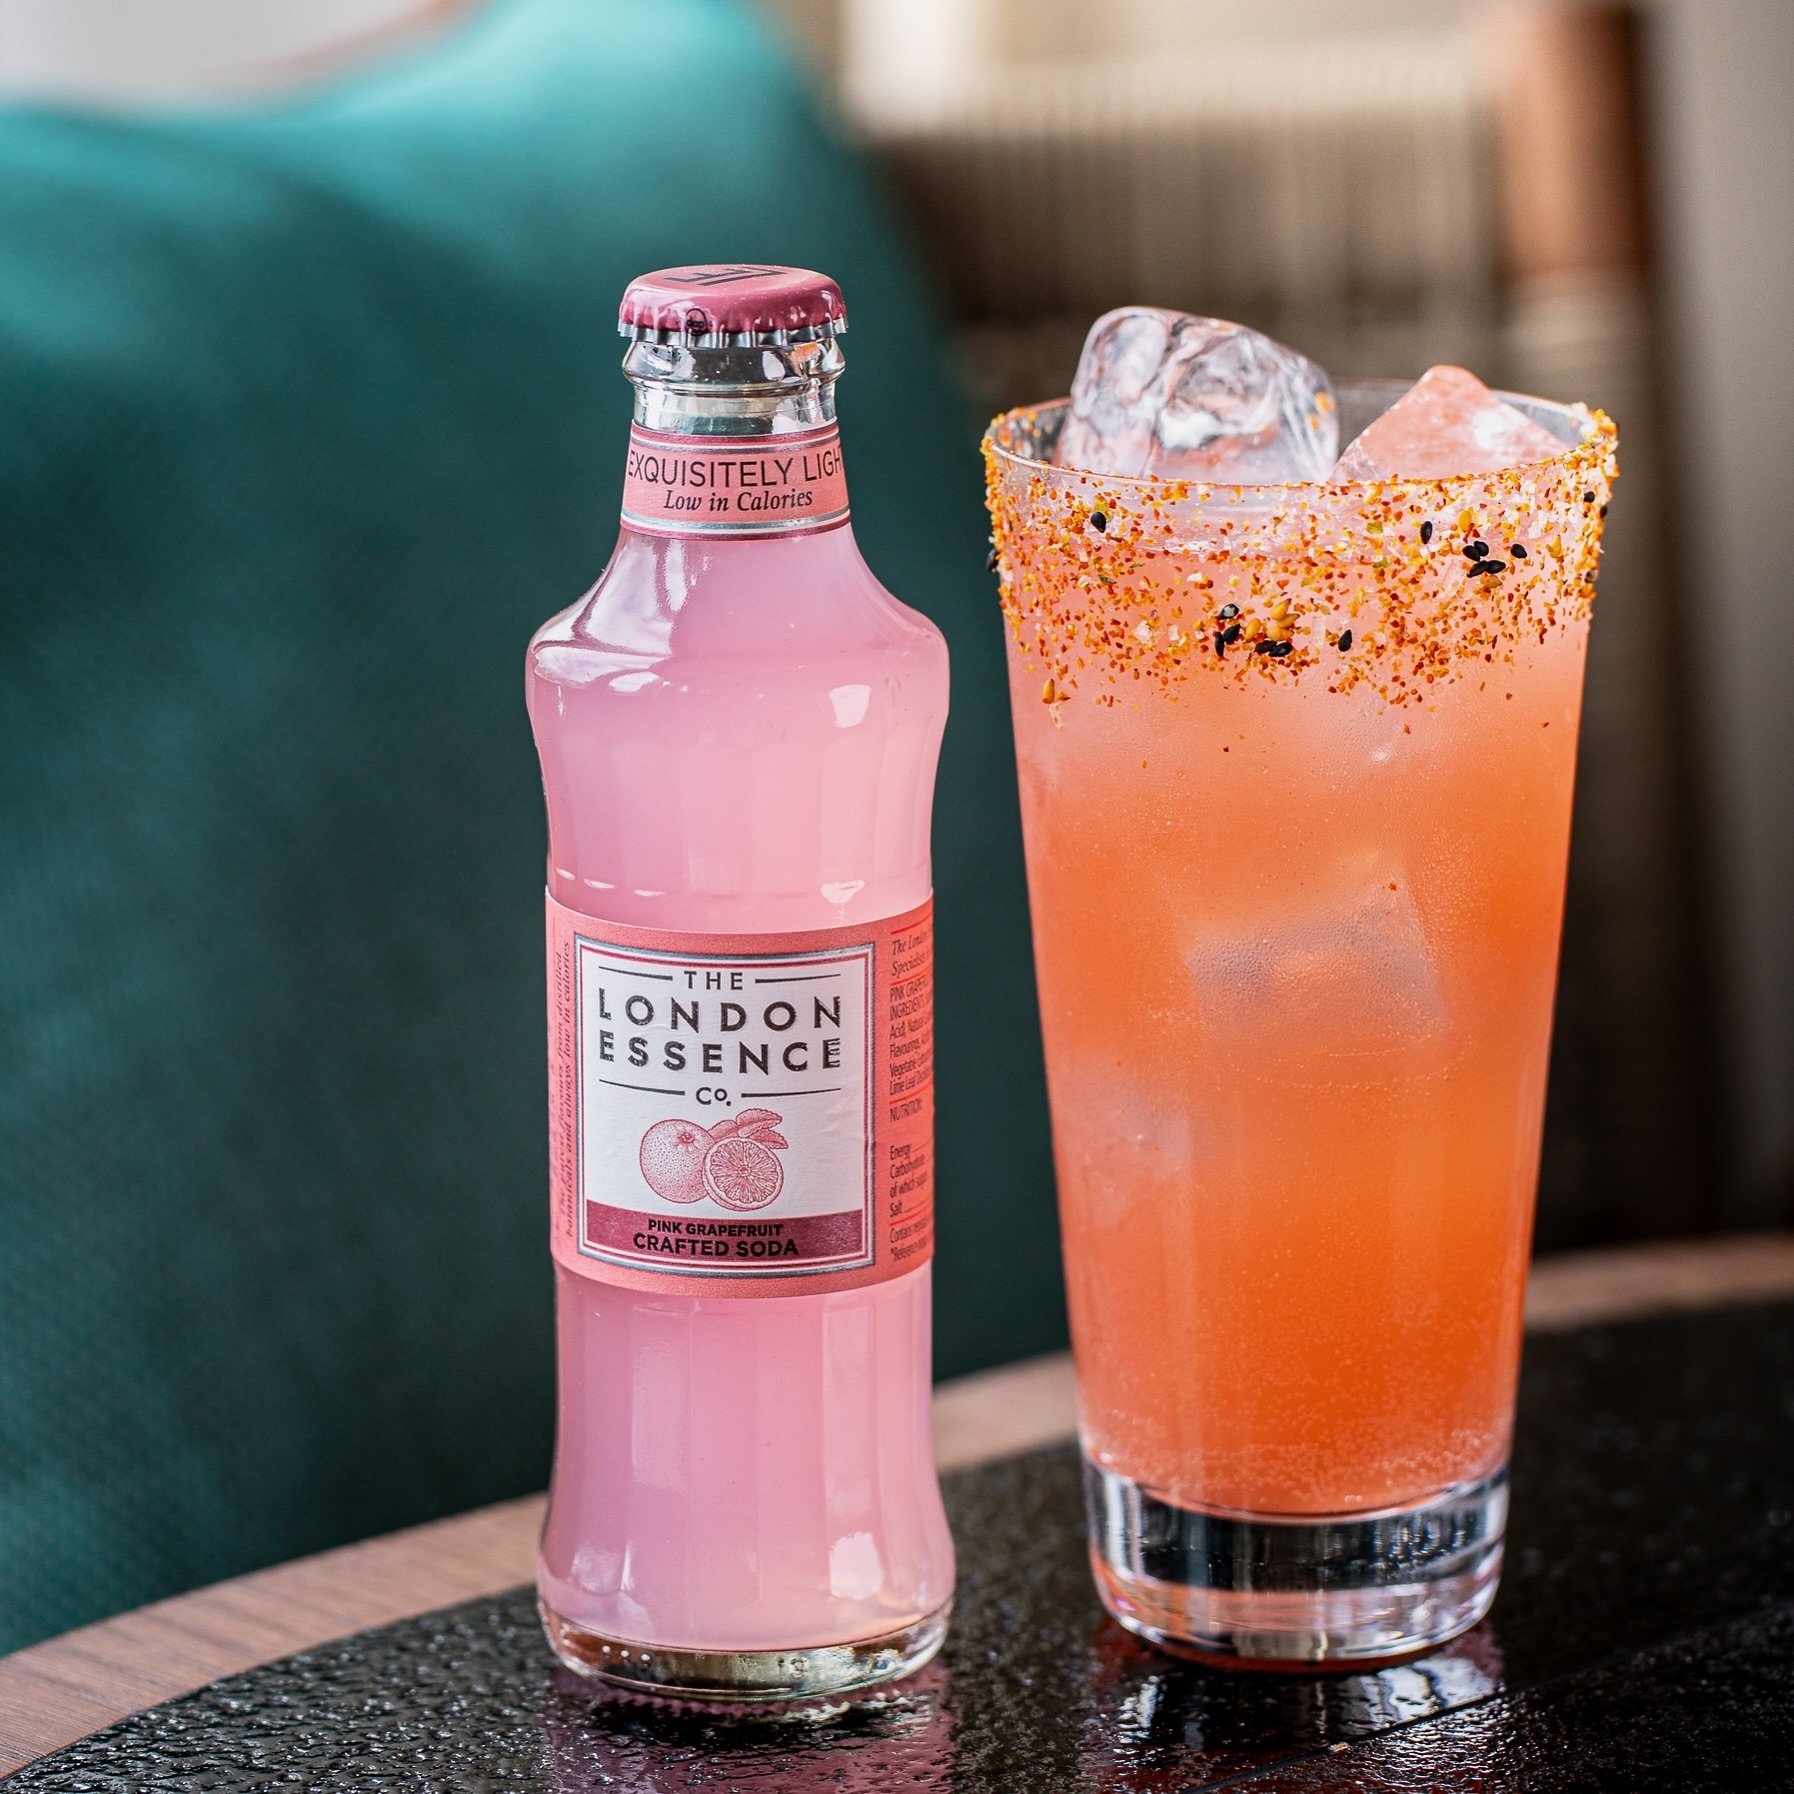 Join us as we celebrate all things Paloma throughout the end of May and into June at #LosMochisLondonCity and #LosMochisNottingHill. Experience the refreshing flavours with our Paloma-inspired cocktails including Colomba, Coffee Paloma and Paloma de 